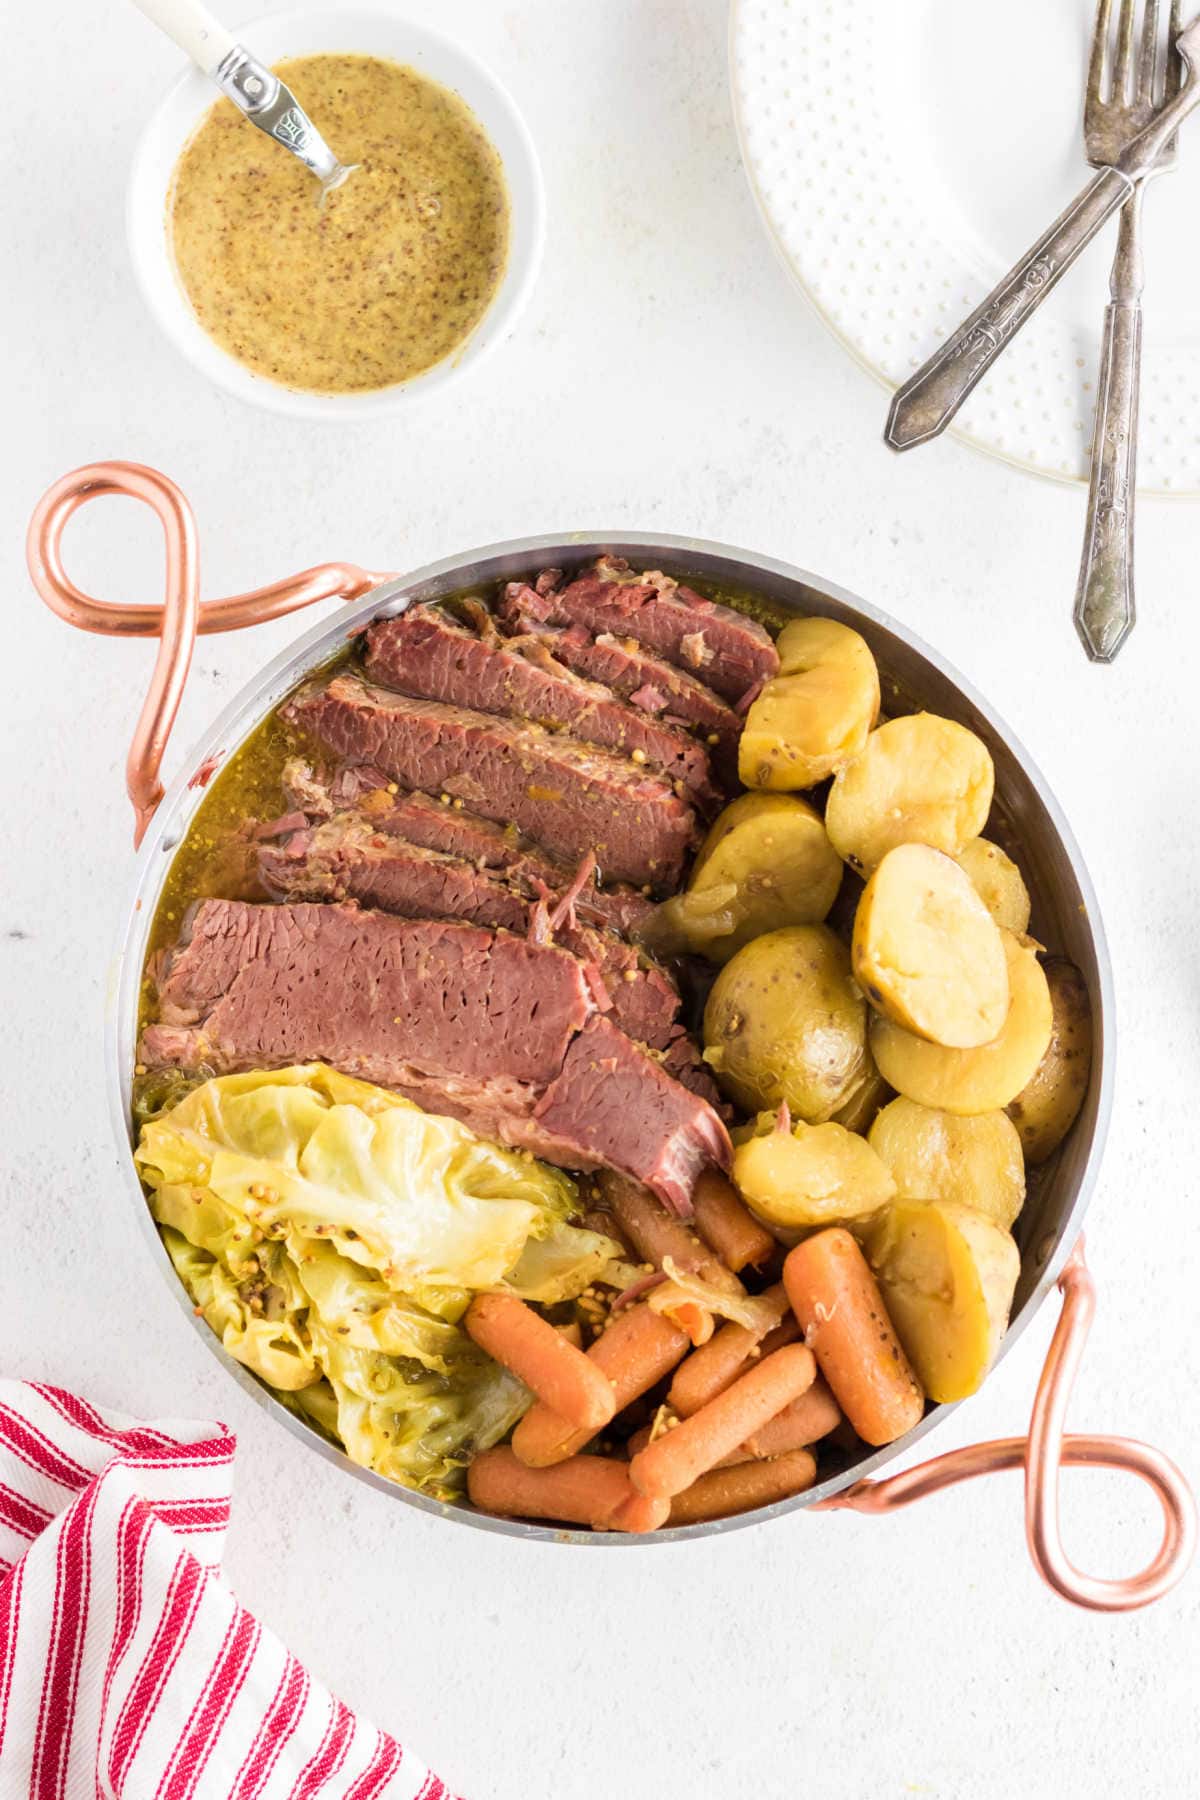 Overhead view of corned beef and vegetables in a serving dish.